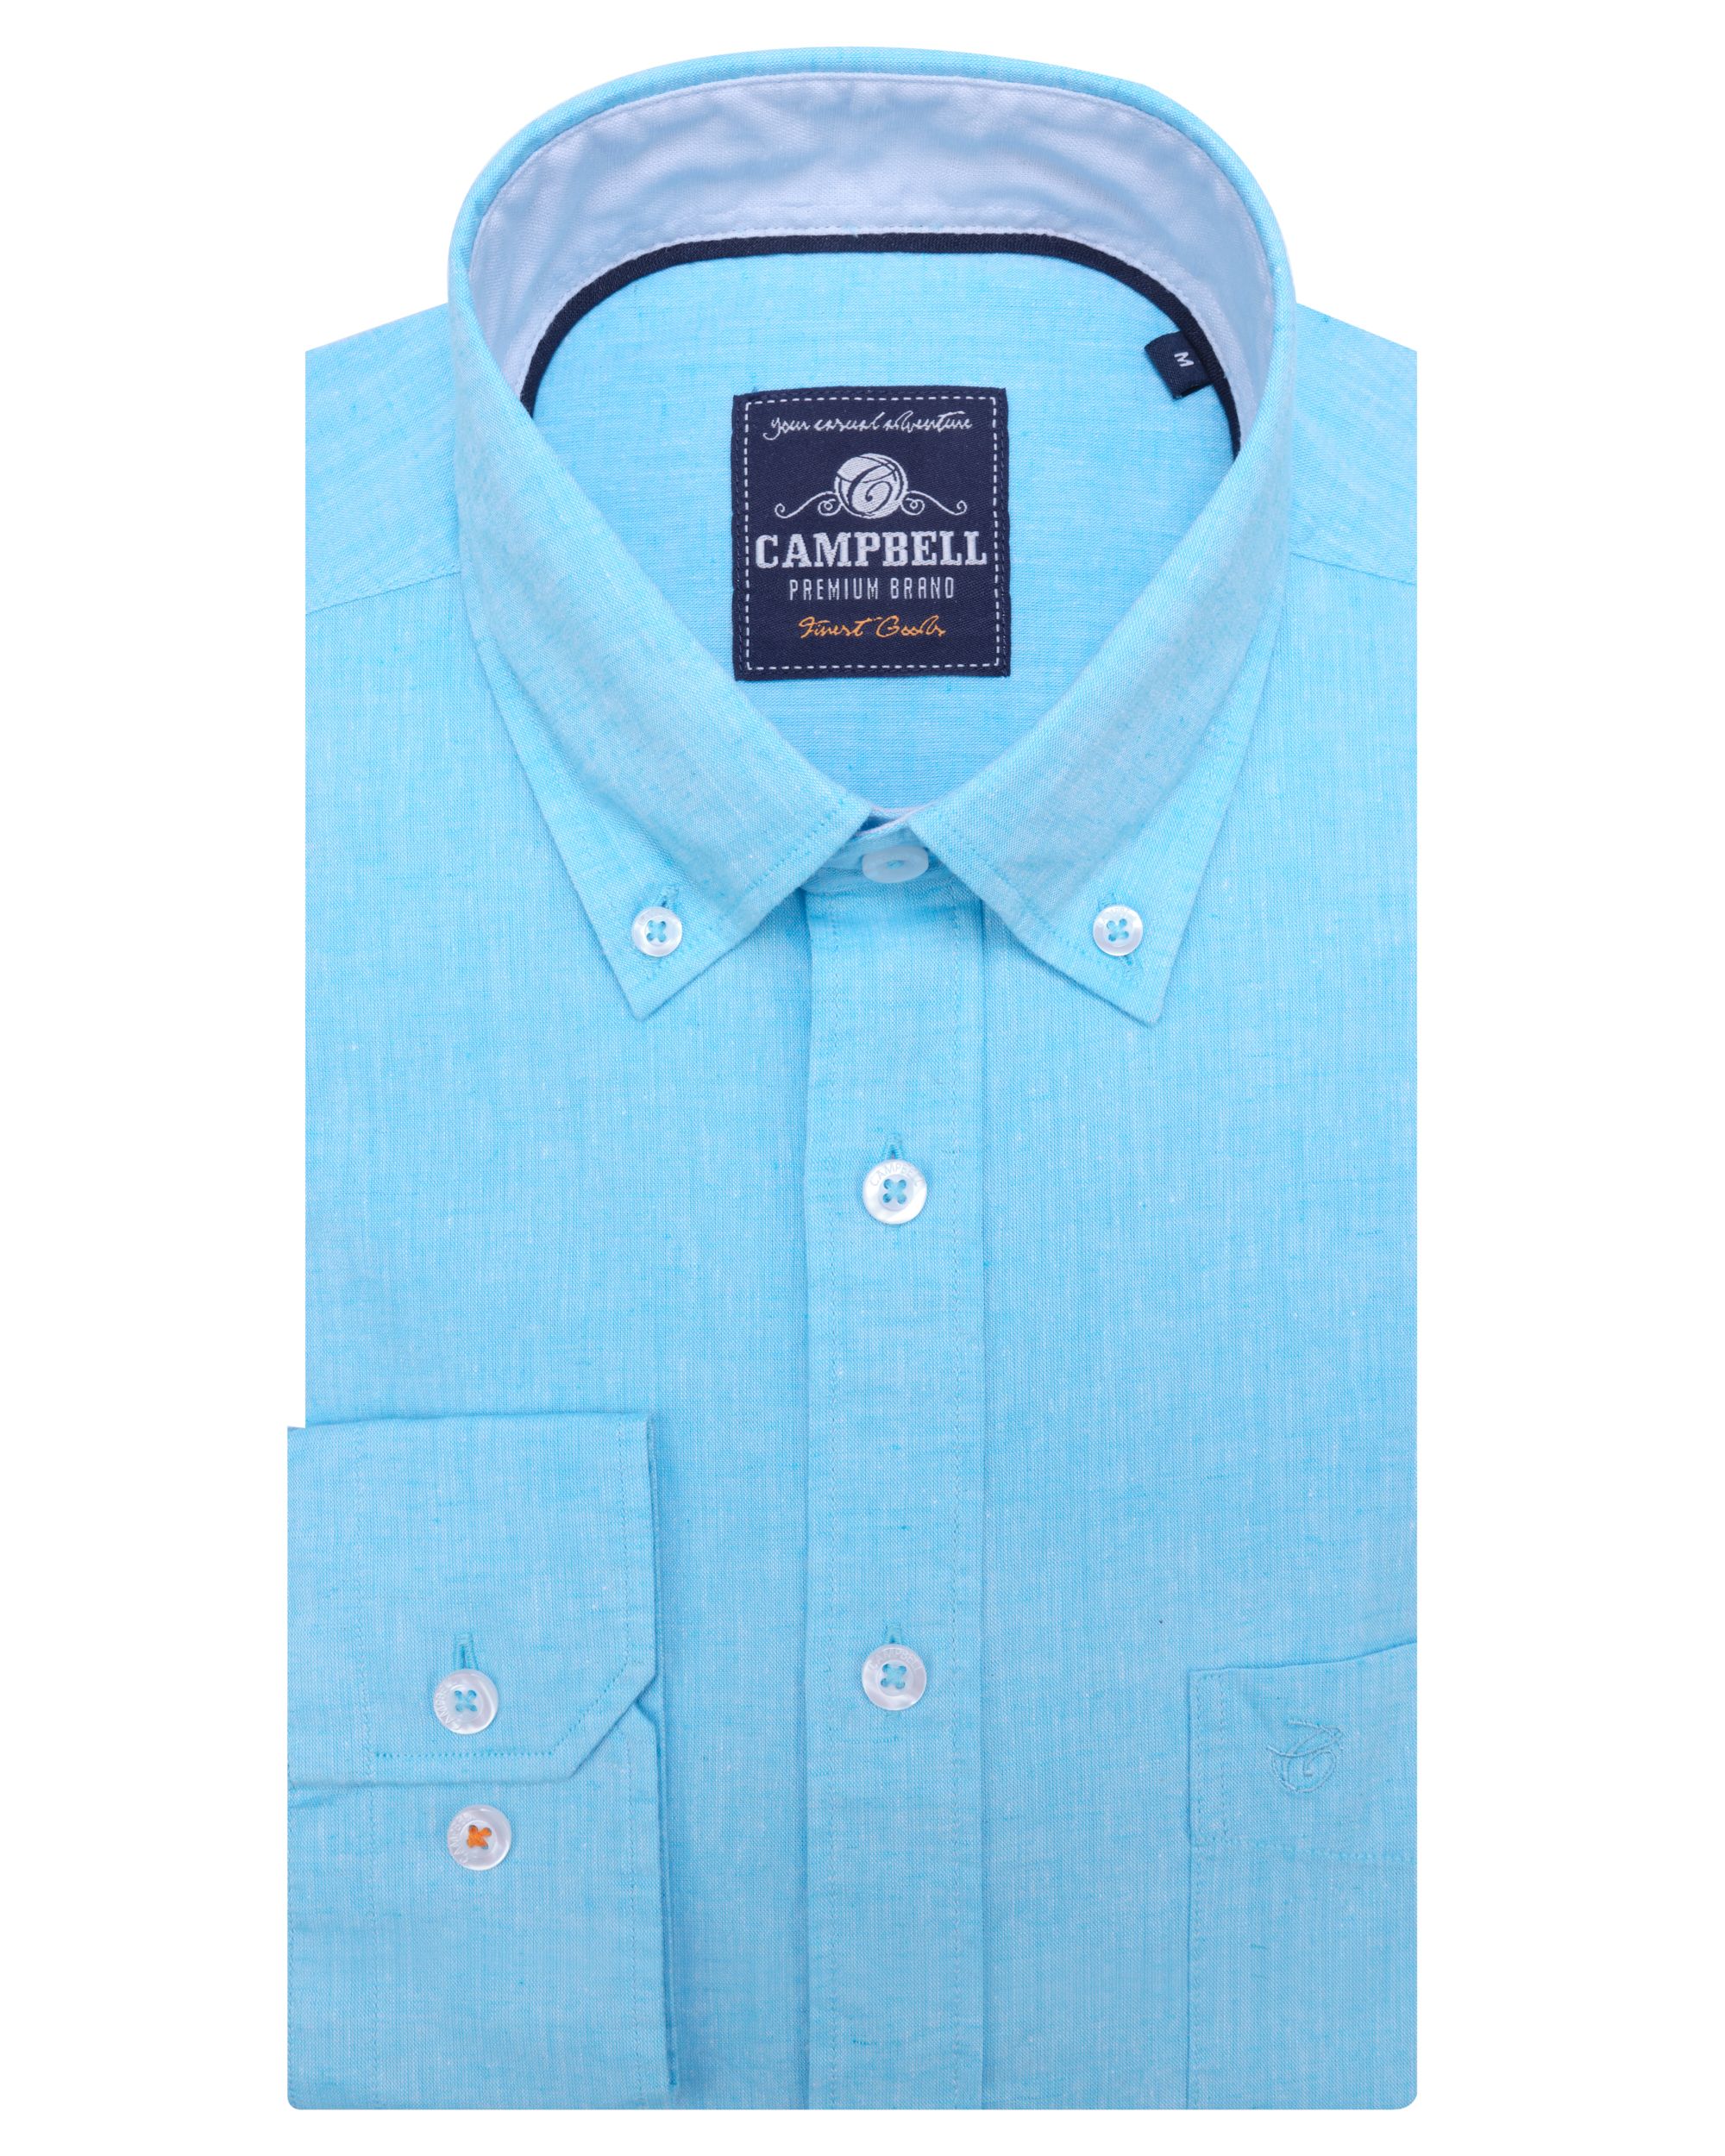 Campbell Classic Casual Overhemd KM Biscay Bay 073946-007-L